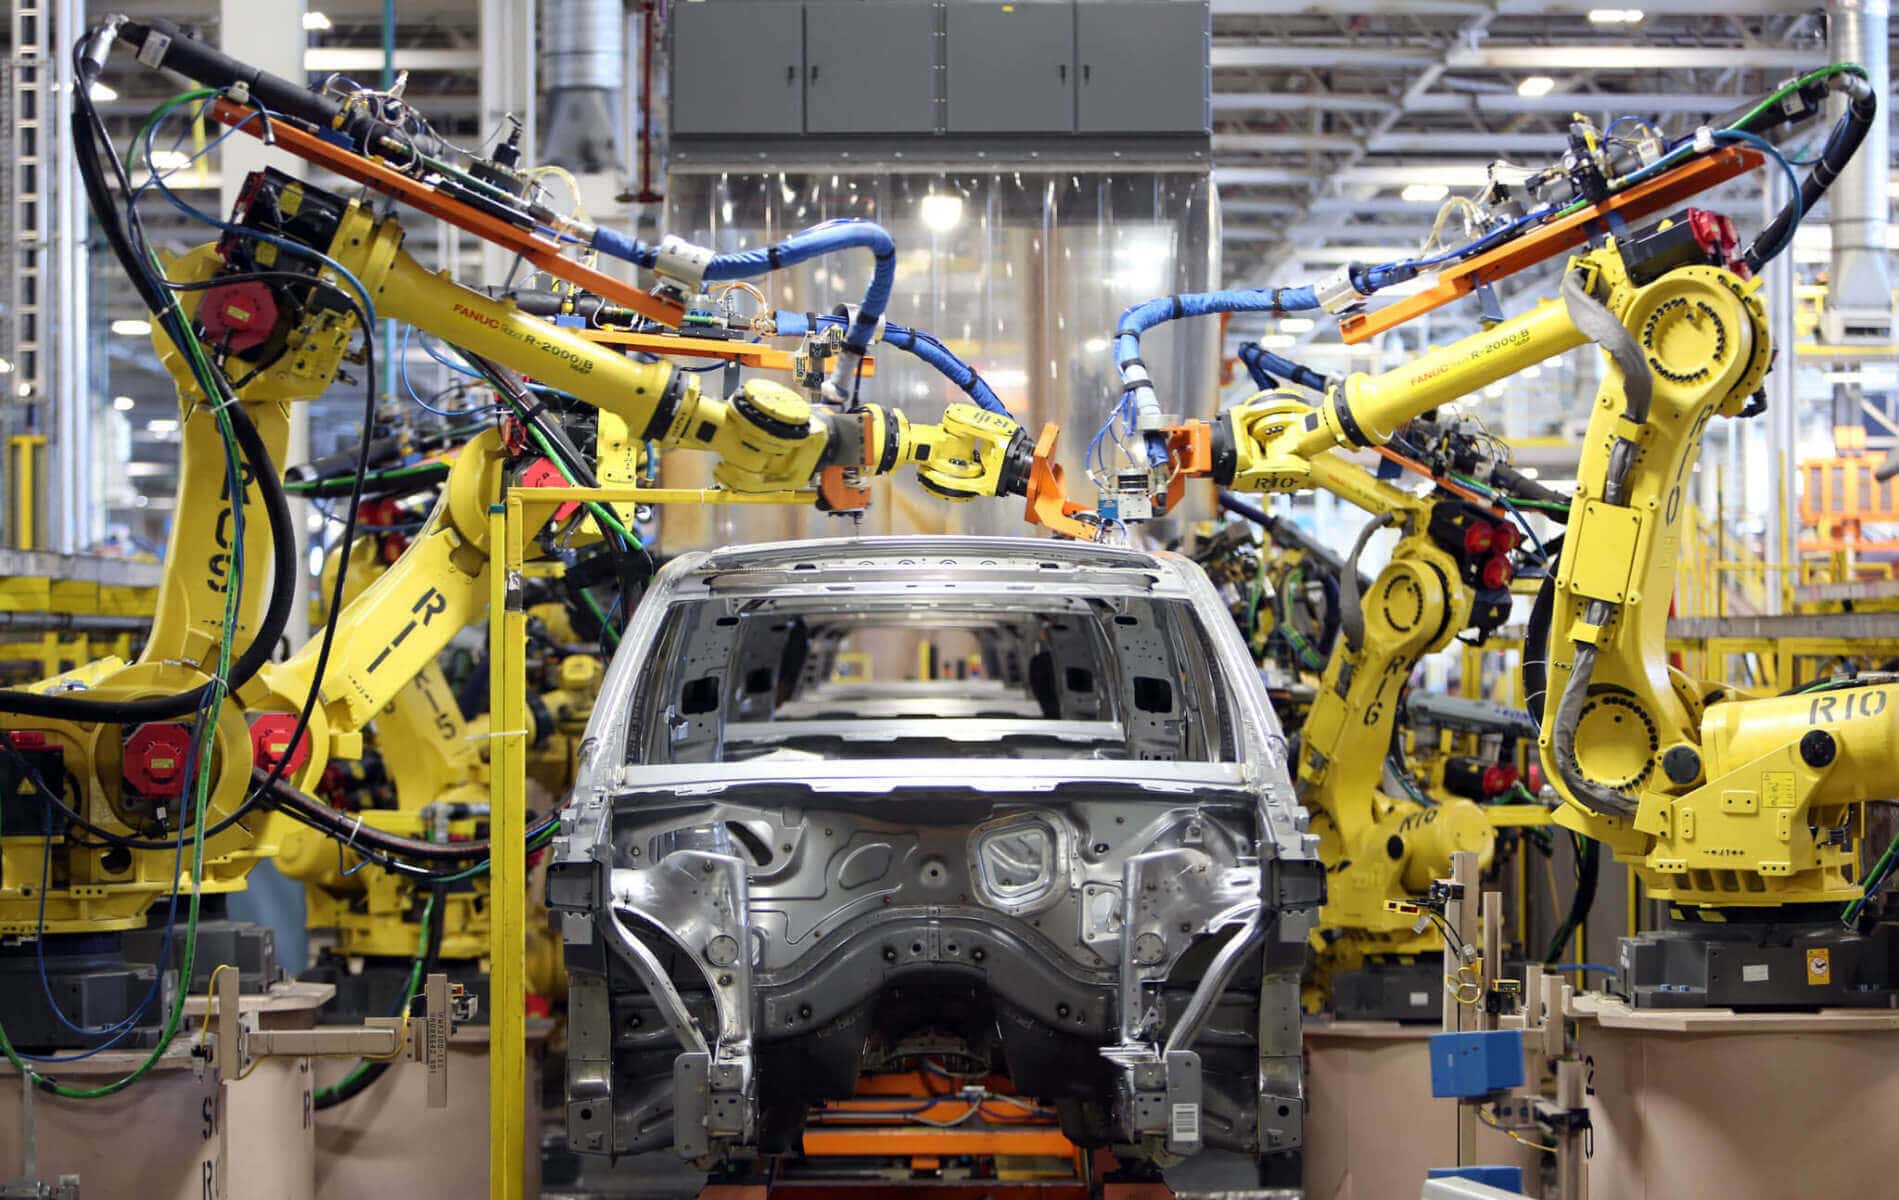 An automobile assembly line with expensive machines financed through C & I lending